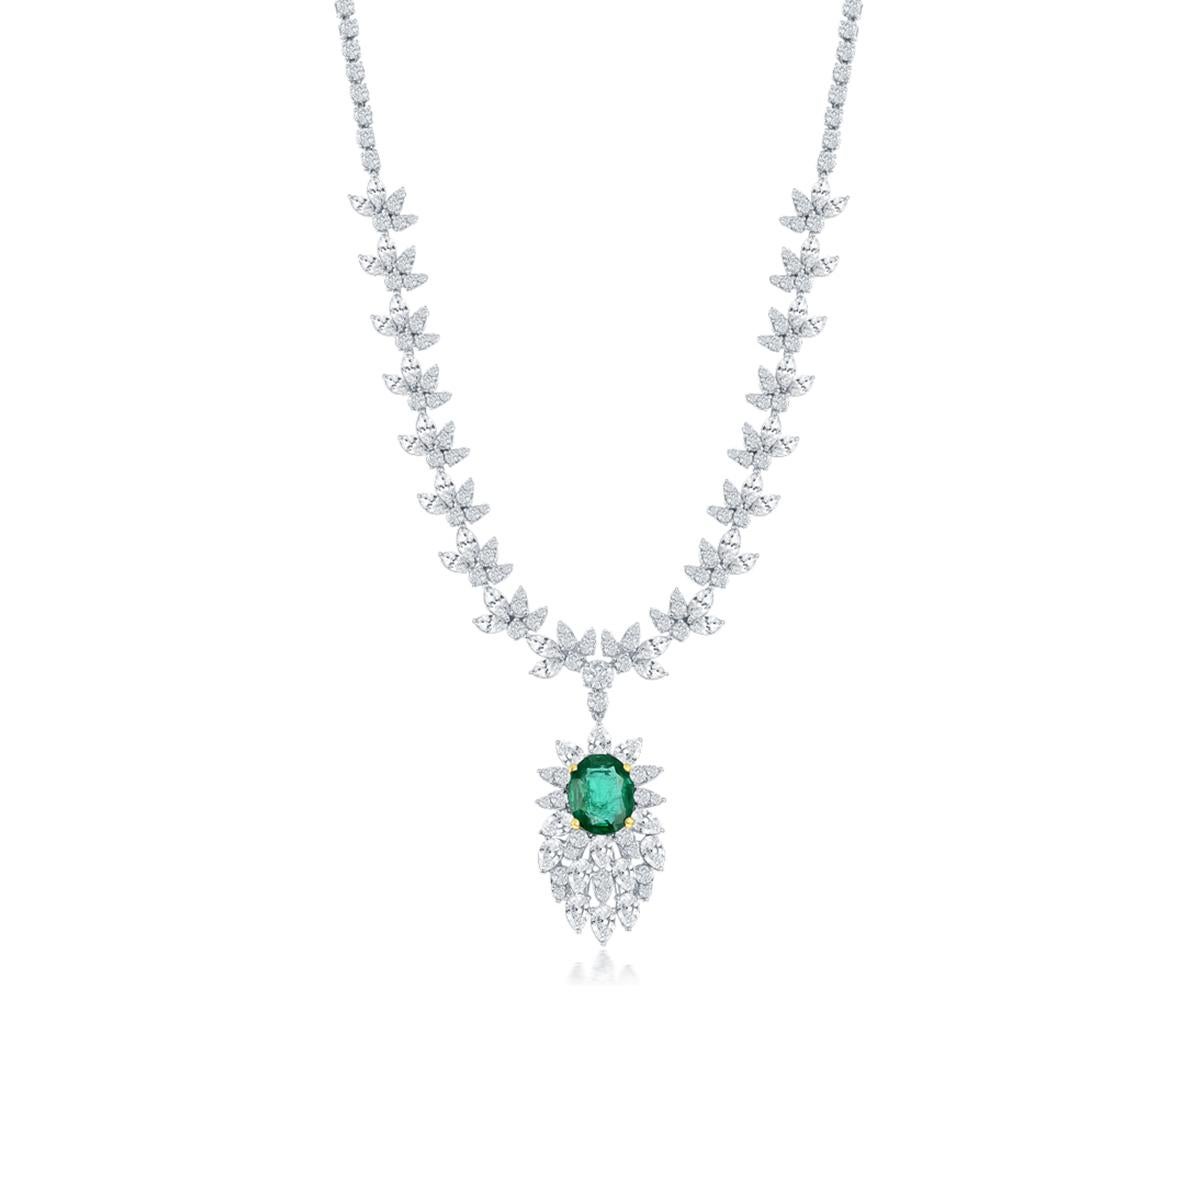 EMERALD AND DIAMOND NECKLACE
Beautiful lace-like diamond detail enhances a rich green oval emerald.
Item:	# 03030
Metal:	18k W
Lab:	C.dunaigre
Color Weight:	3.32 ct.
Diamond Weight:	11.56 ct.